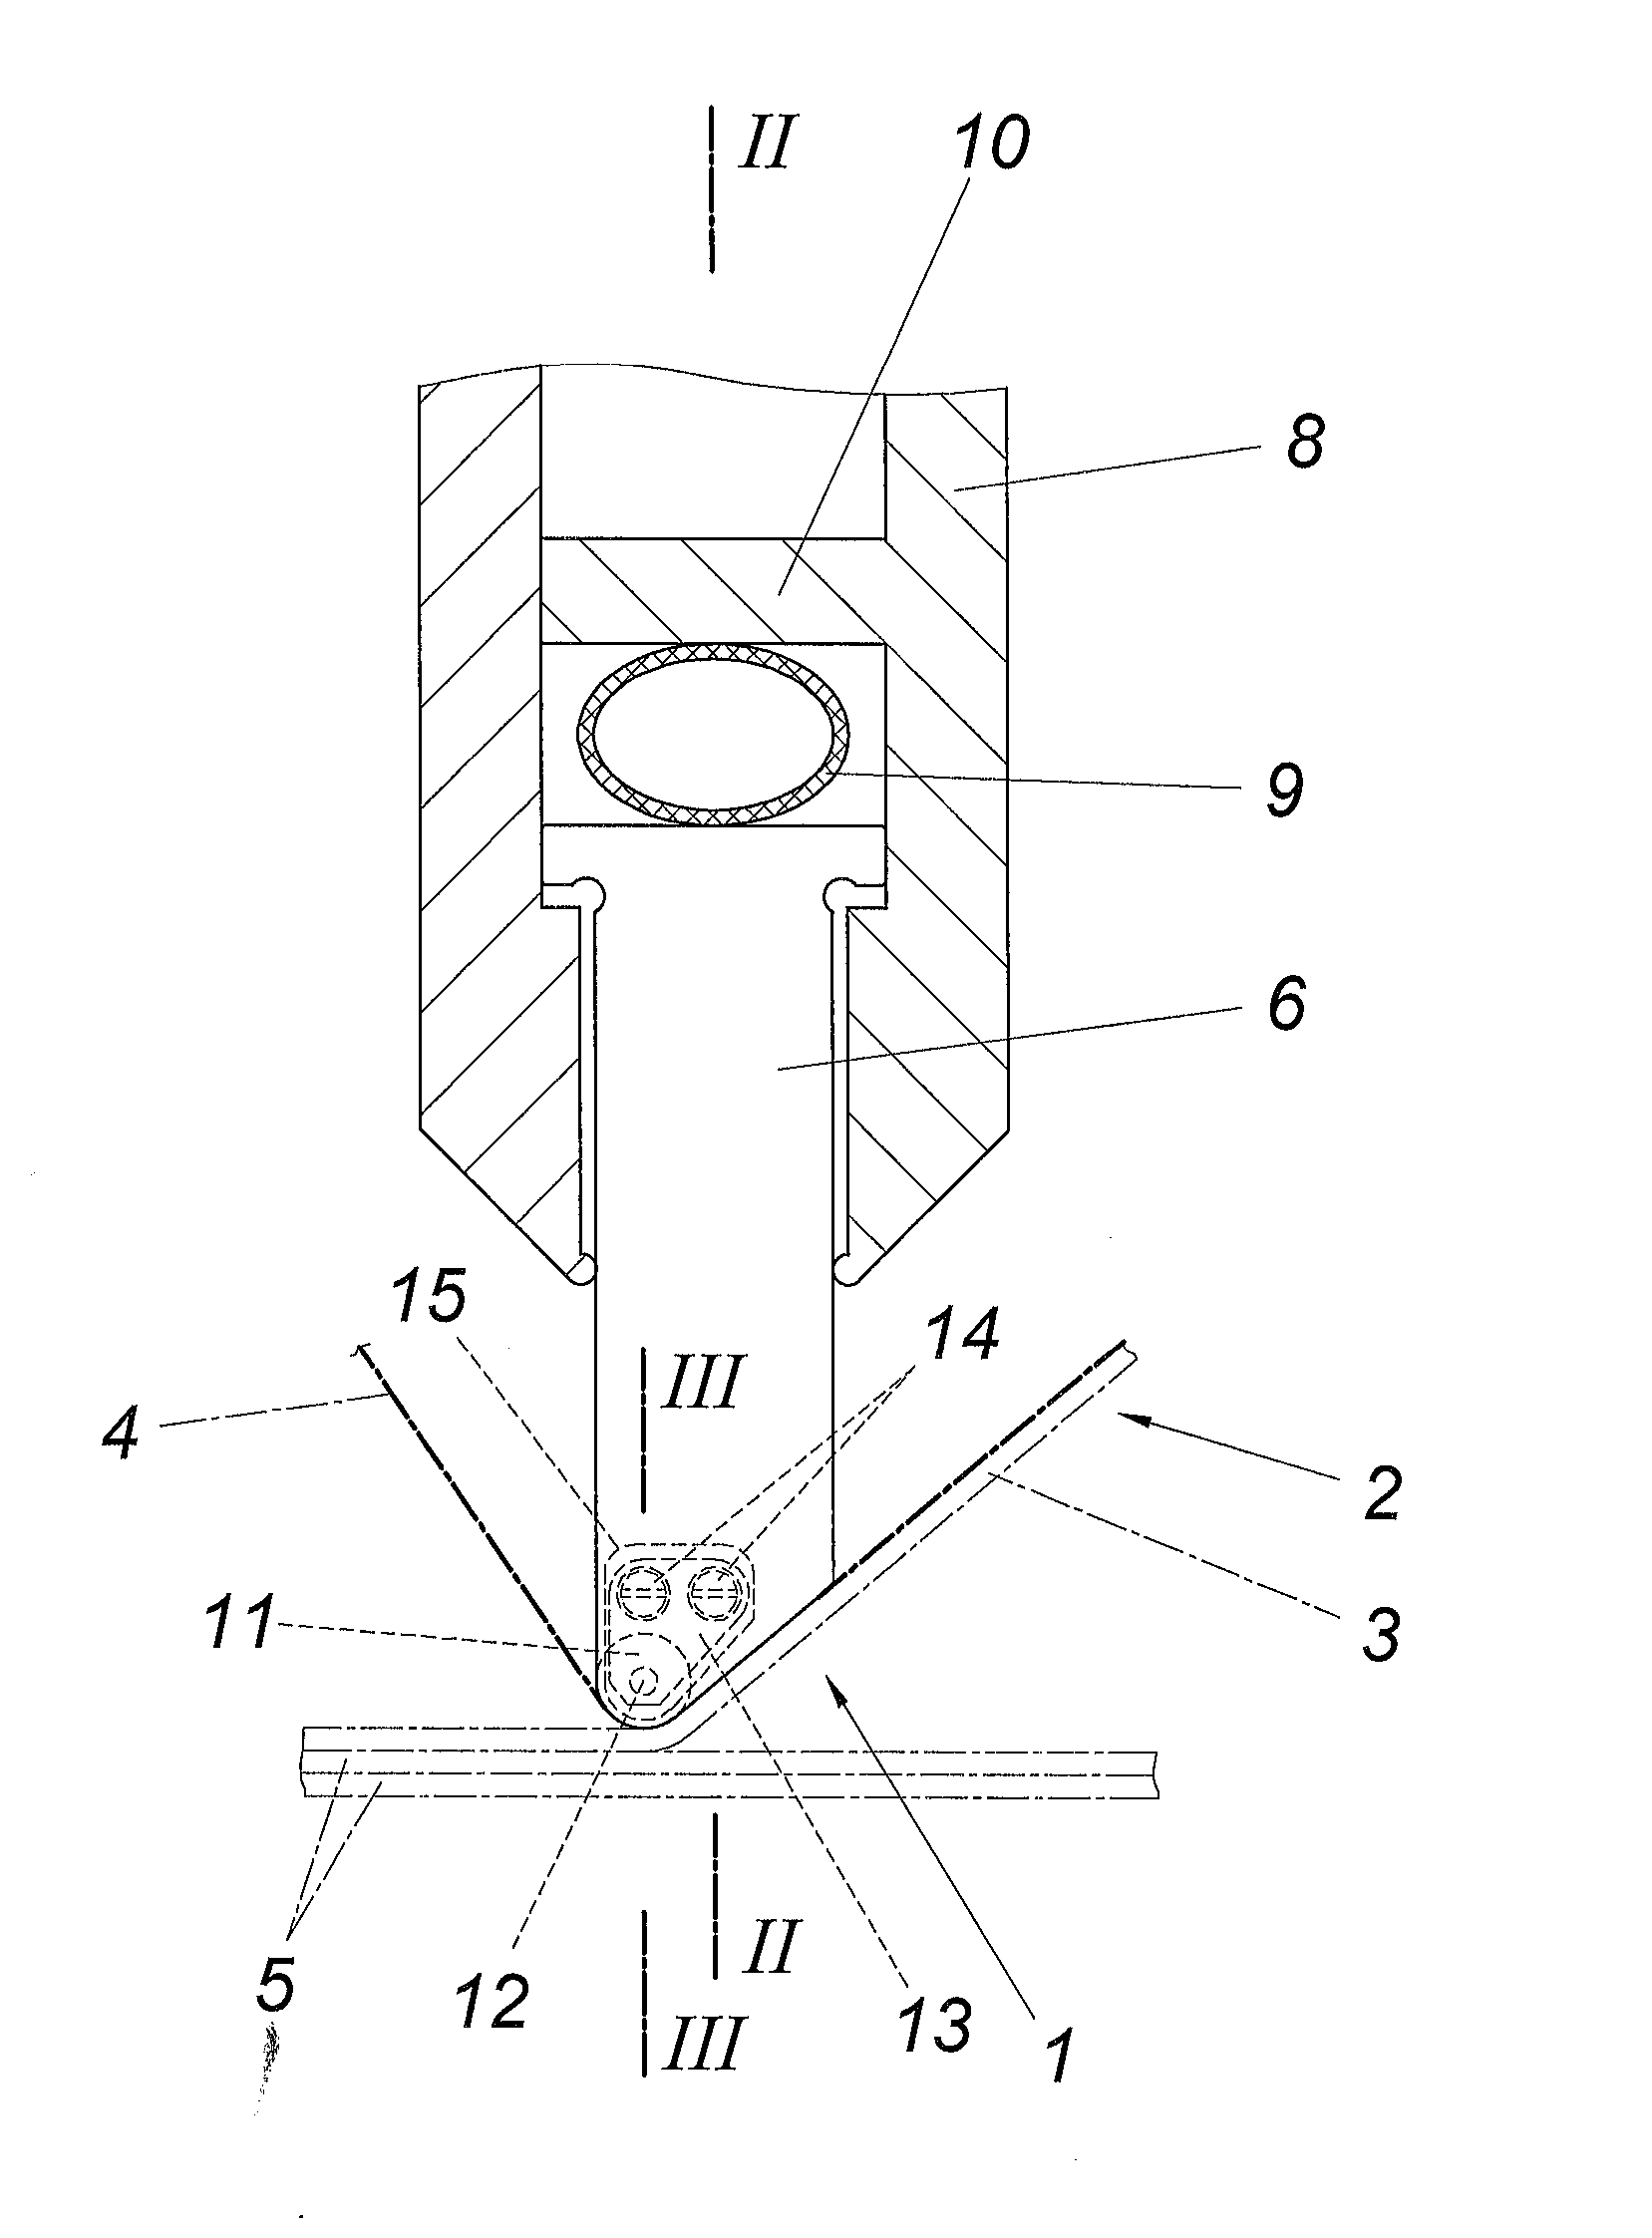 Apparatus for laying fiber tapes